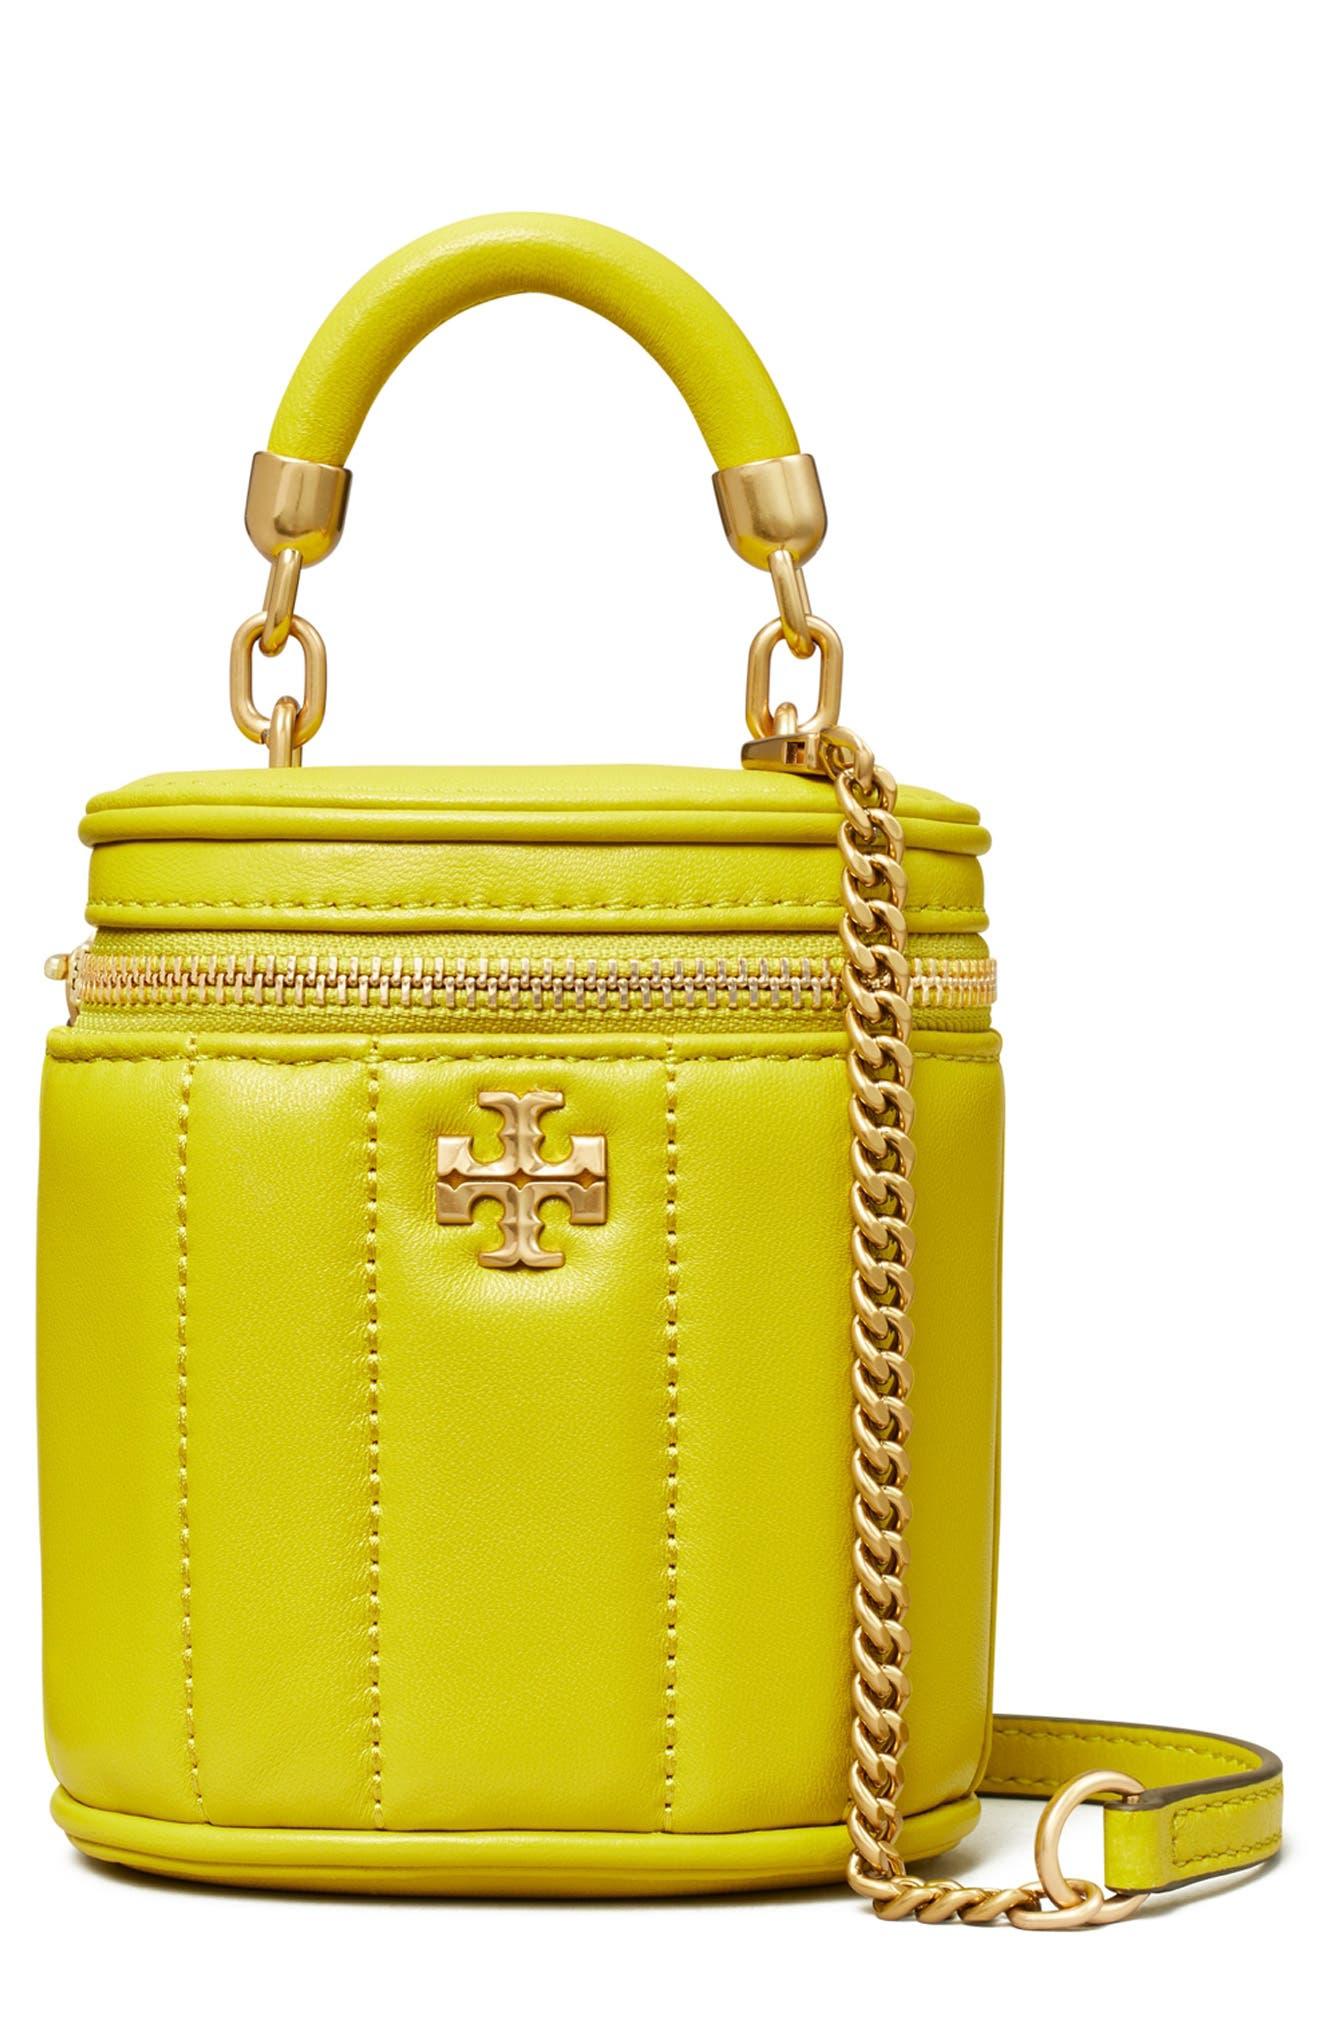 Tory Burch Mini Kira Quilted Leather Vanity Case in Yellow | Lyst